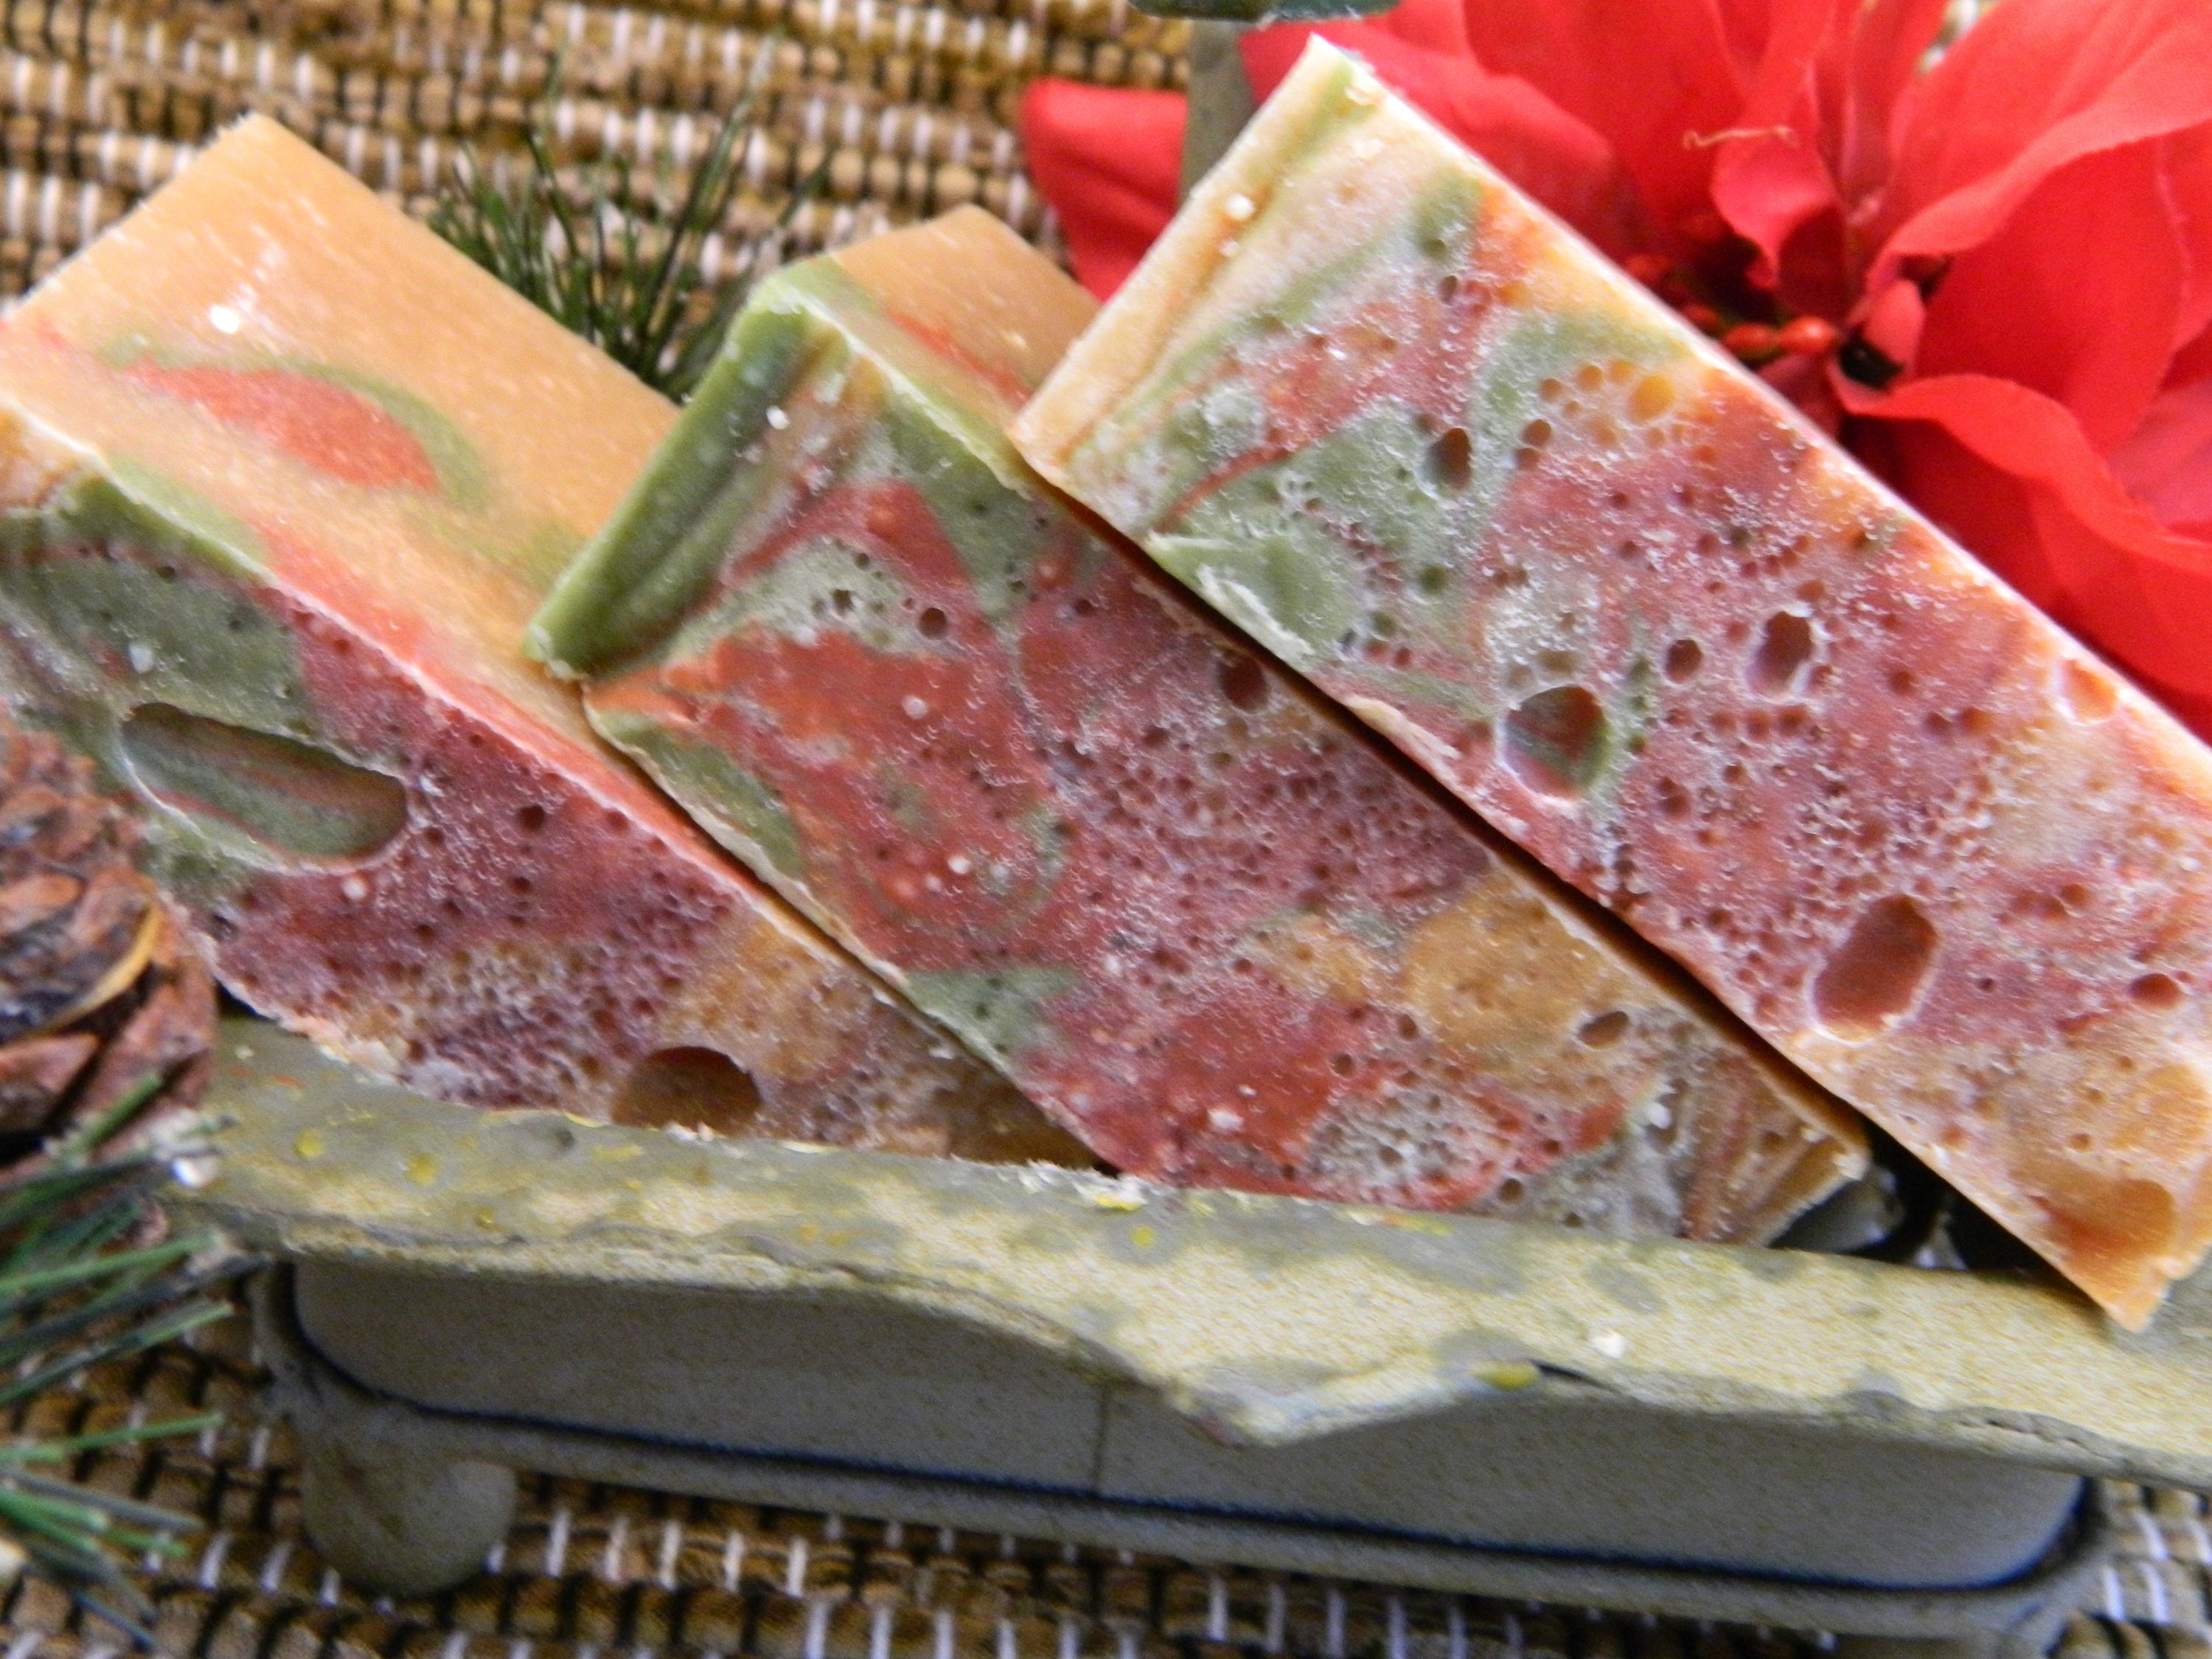 Peppermint Candy Handmade Cold Process Soap Made With Goat Milk 